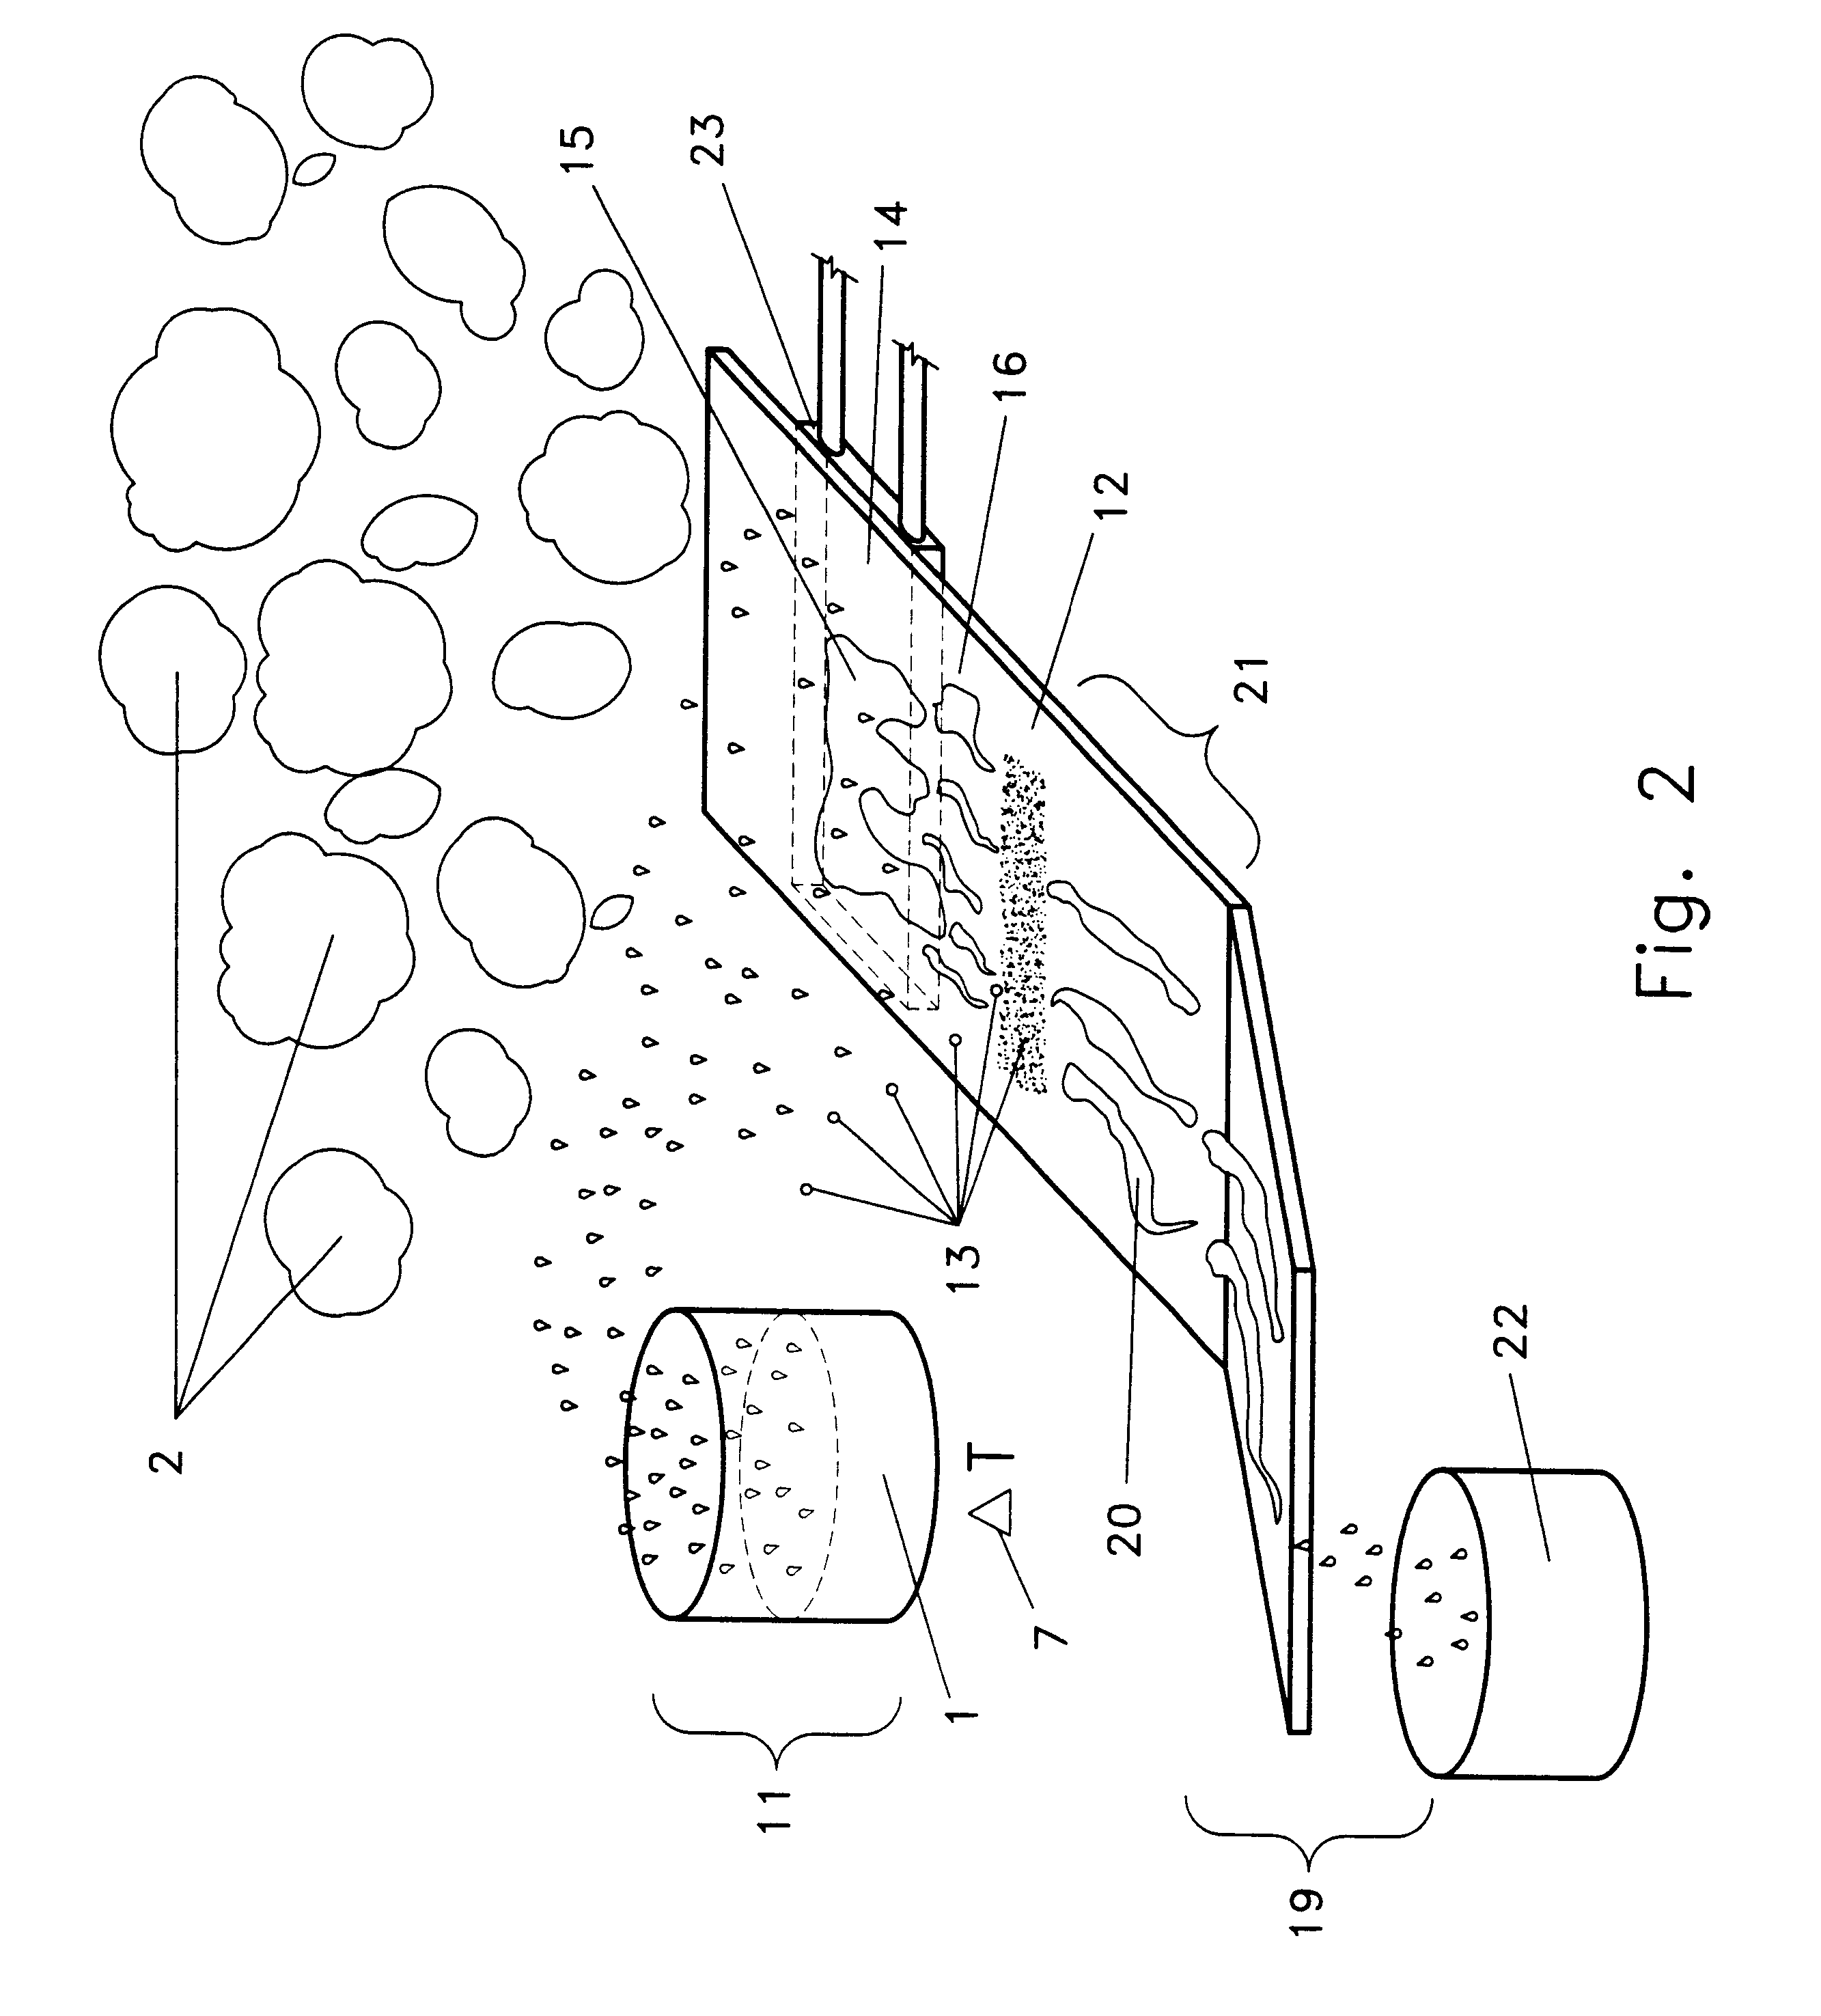 Accelerated water evaporation system